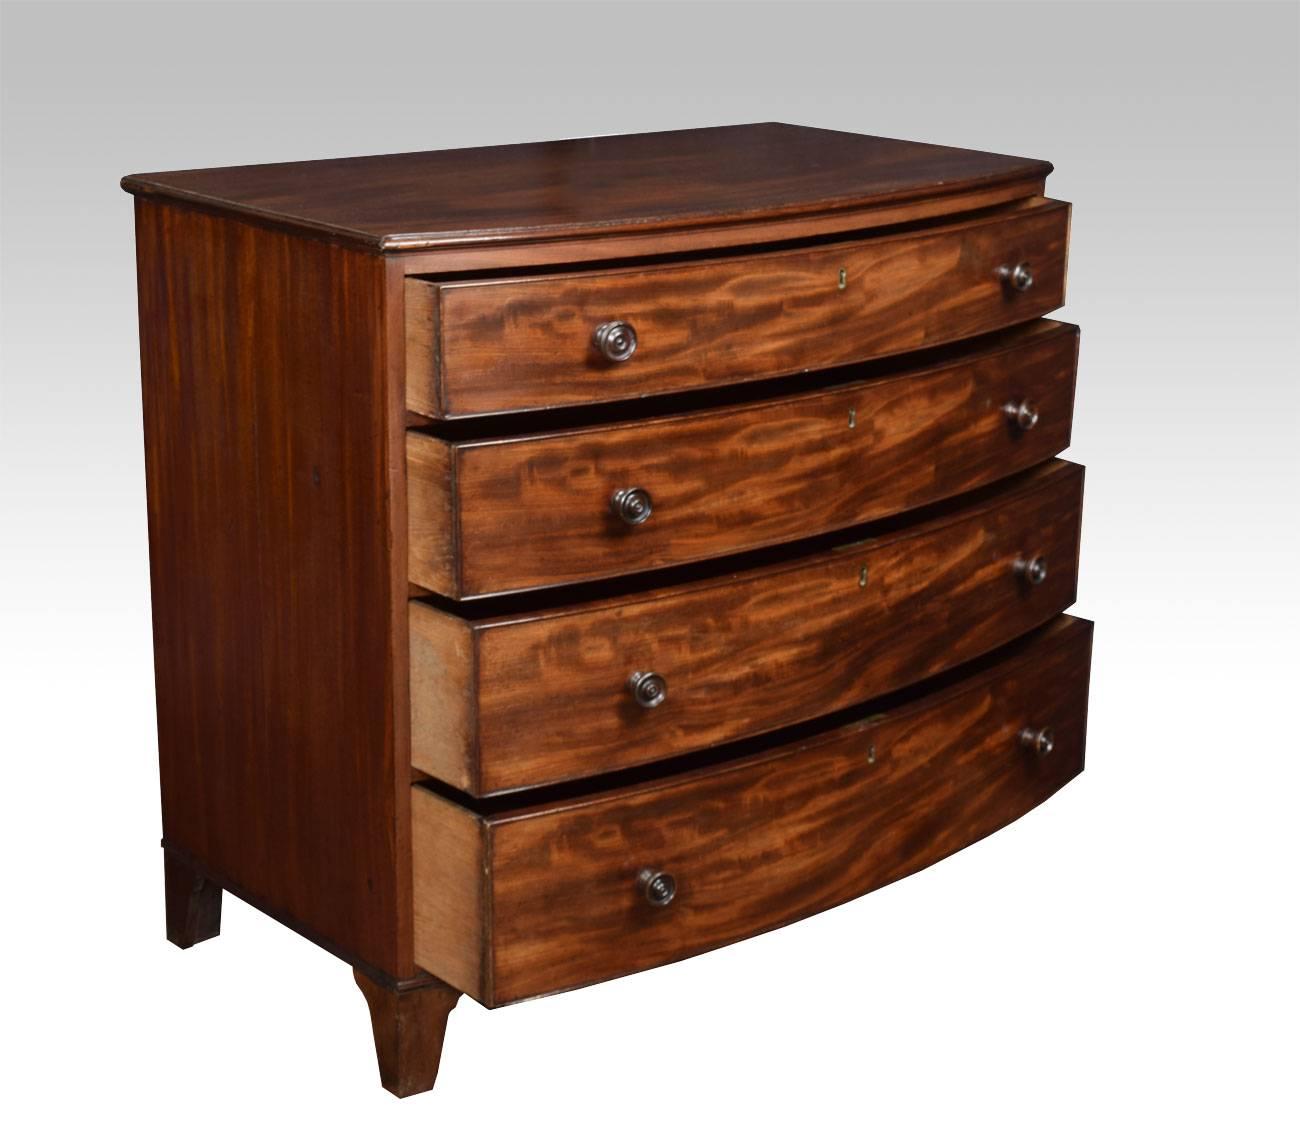 Regency mahogany bow fronted chest of draws the shaped top with moulded edge above four long graduated drawers with turned wooden handles and solid oak draw liners, all raised up on splayed feet.

Dimensions:

Height 39 inches.

Width 43